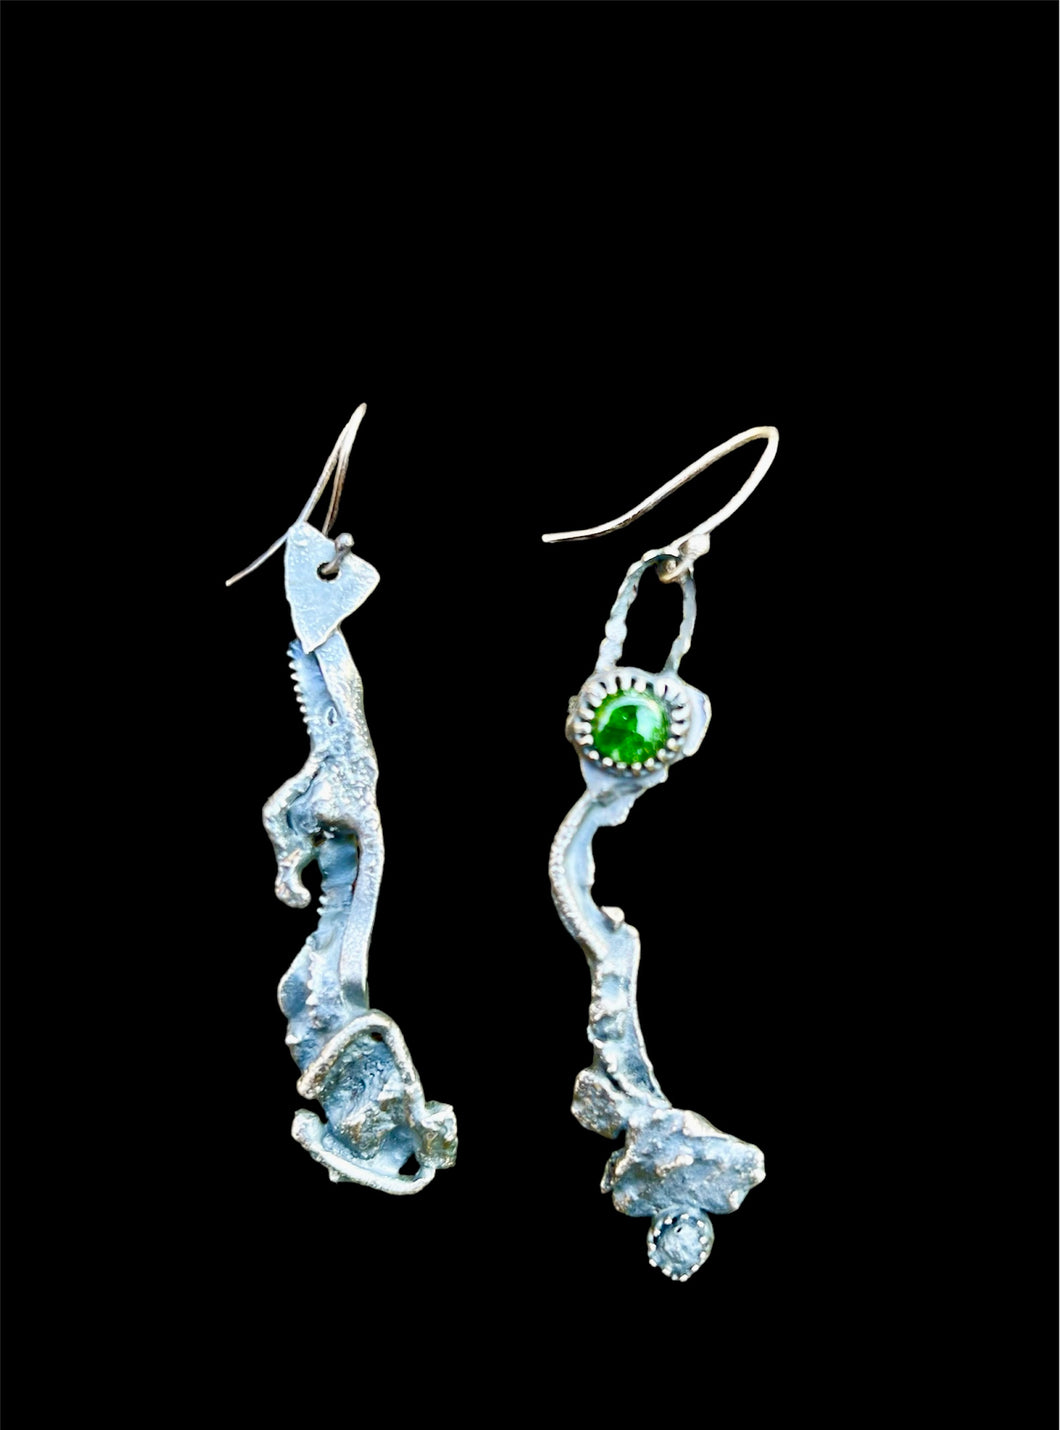 Sculptural Silver Fused Earrings with Chrome Diopside